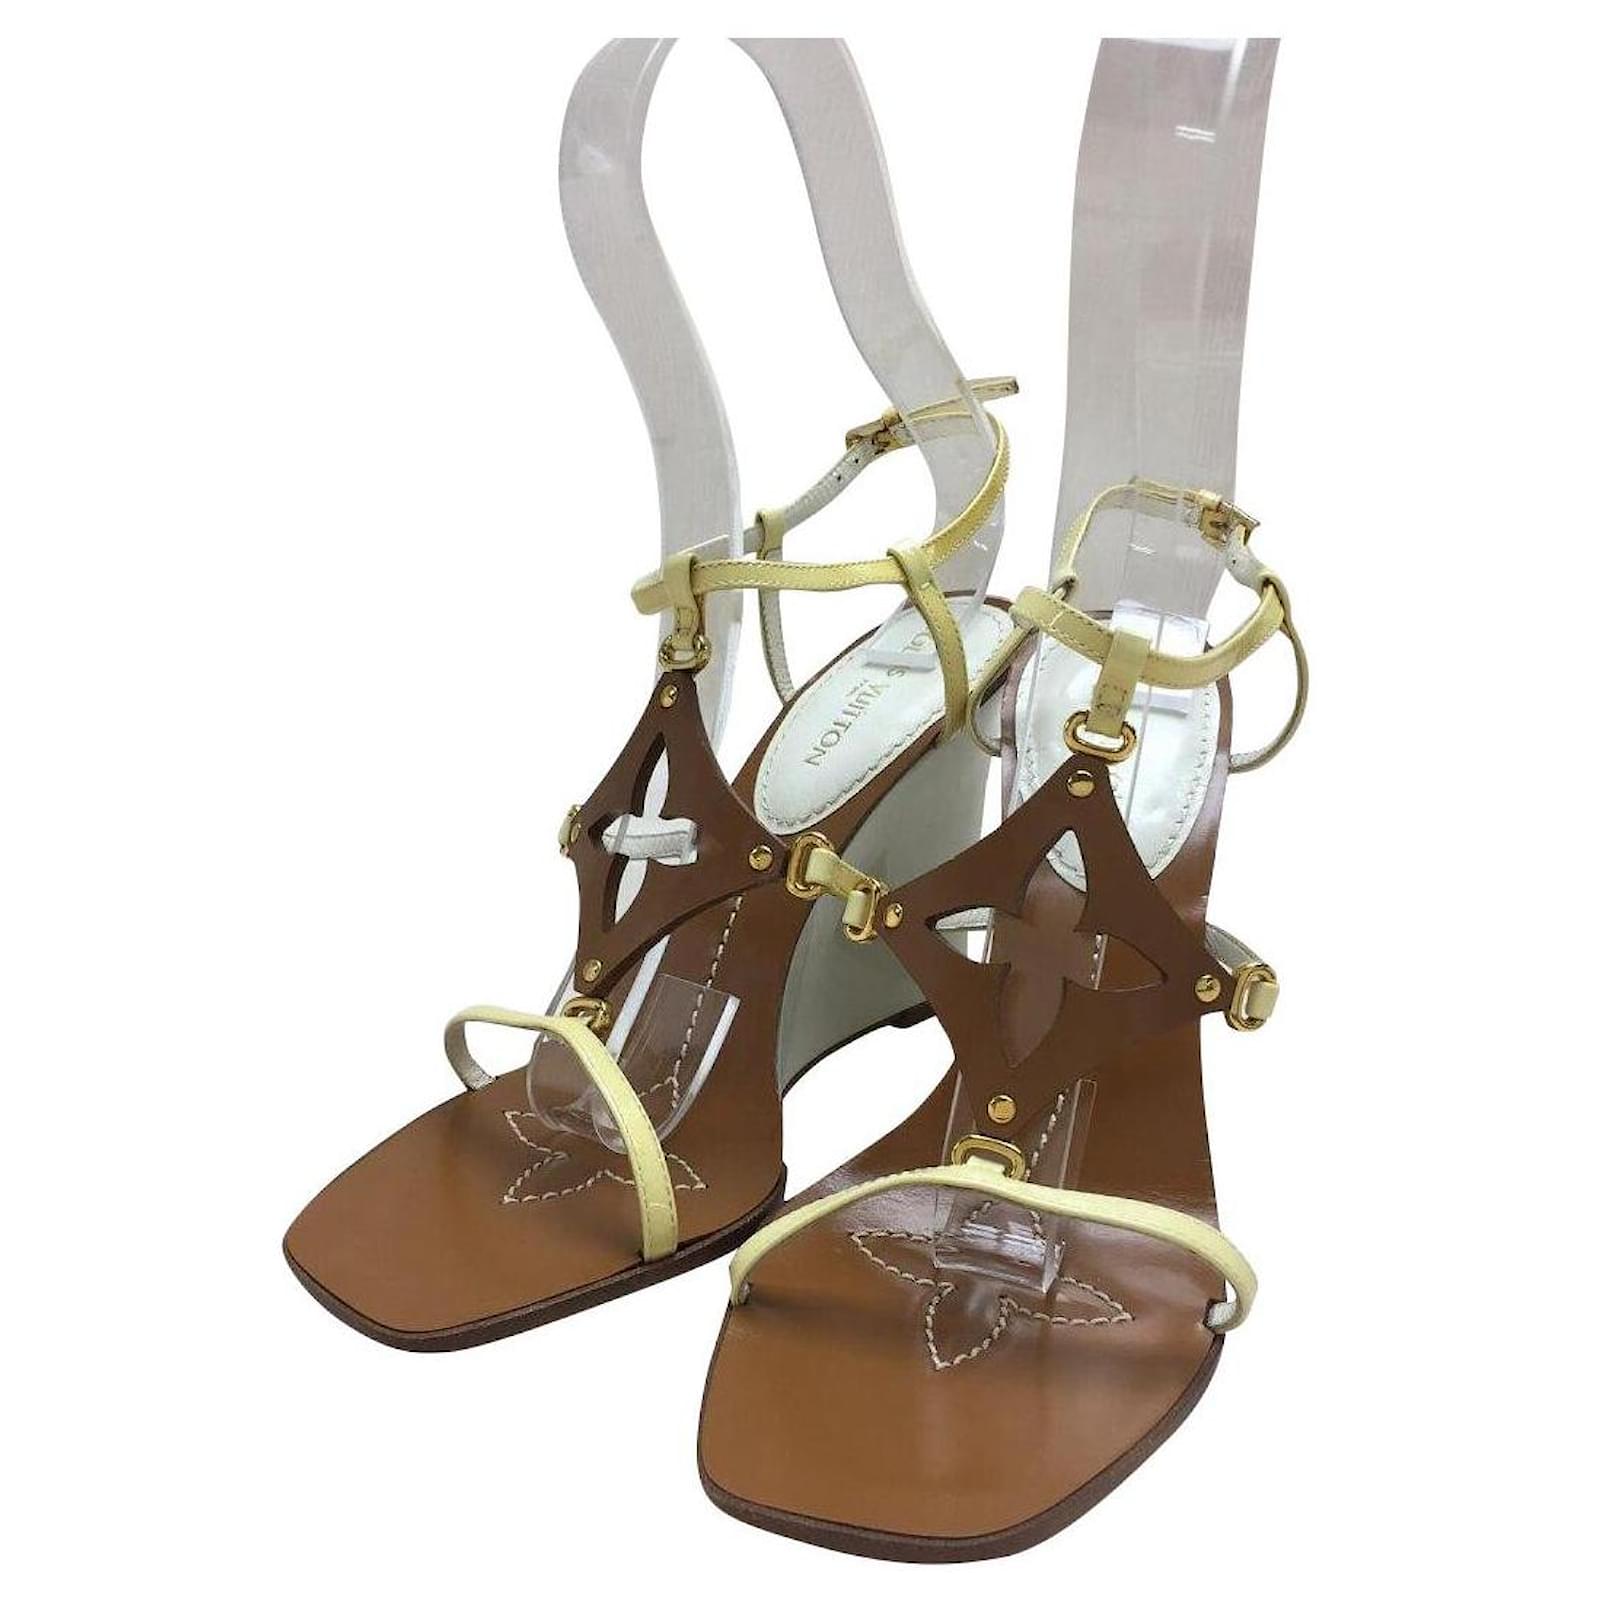 LOUIS VUITTON Sandals / 38 / BRW / Leather / Square to wedge sole